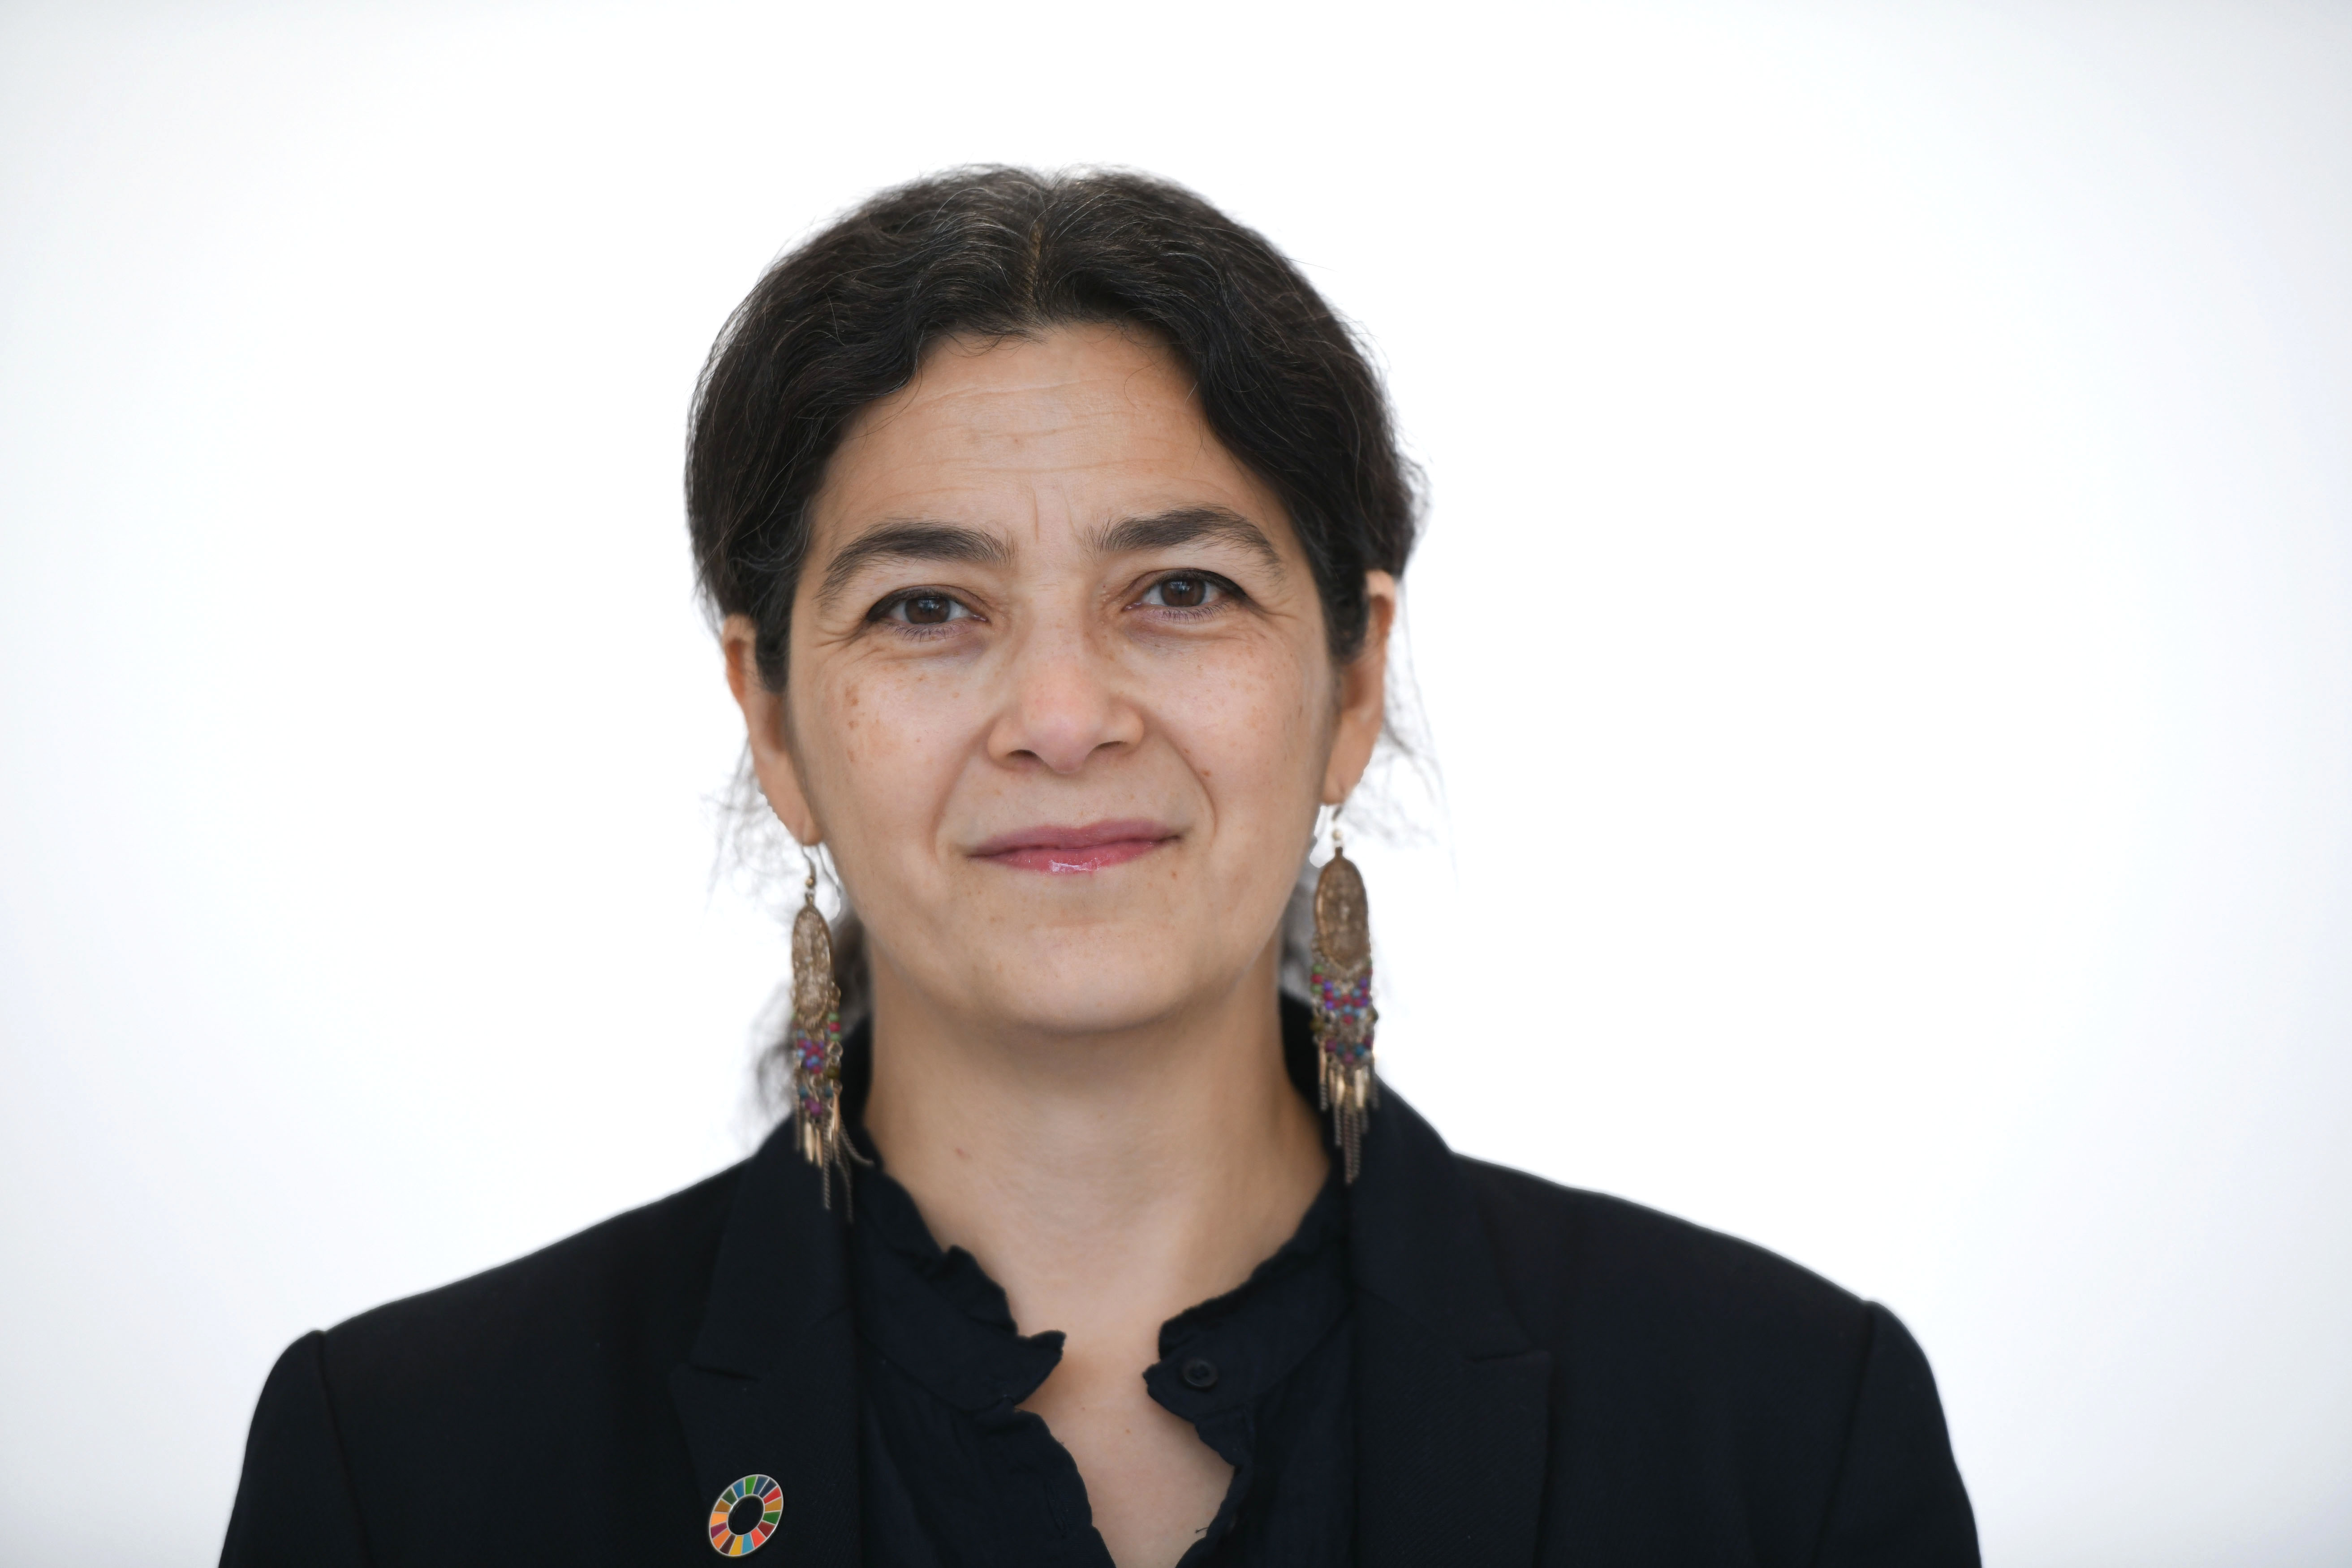 A profile picture of Tuleen Boutaleb, the Head of Department, in the Department of Electrical and Electronic Engineering, at GCU.